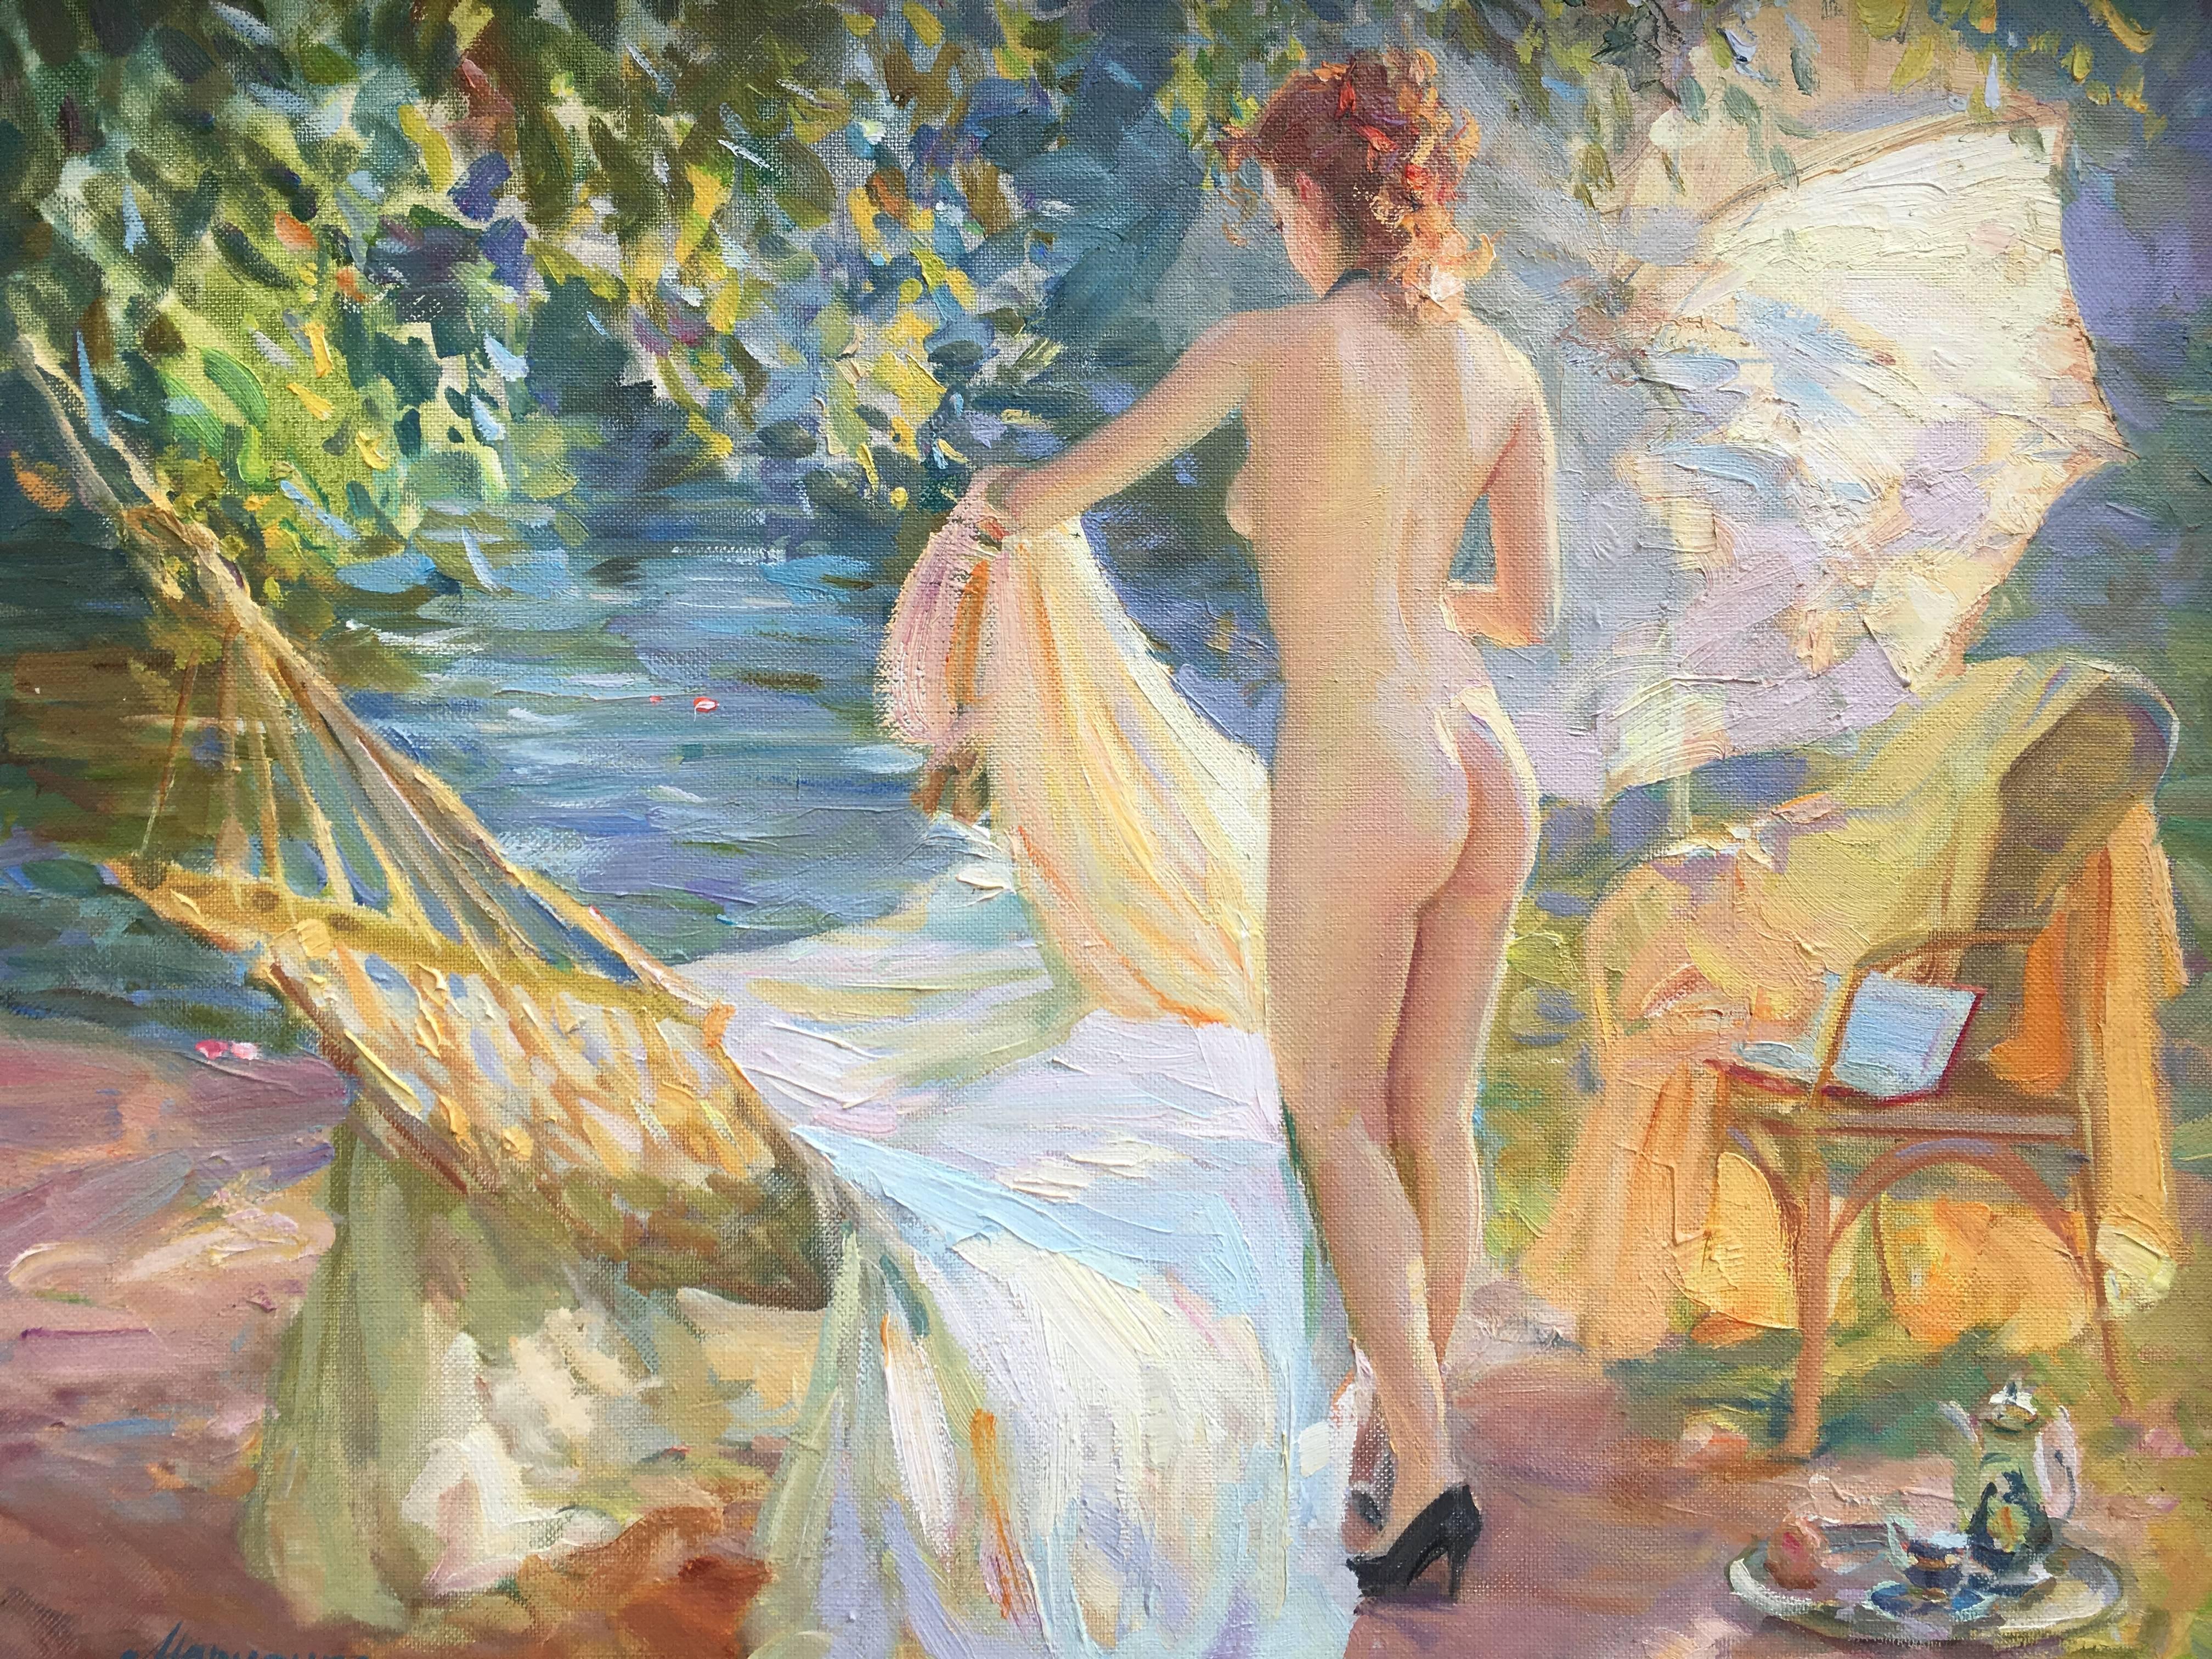 Sergey Marchenko Nude Painting - Sunbathing by the river, French impressionist landscape